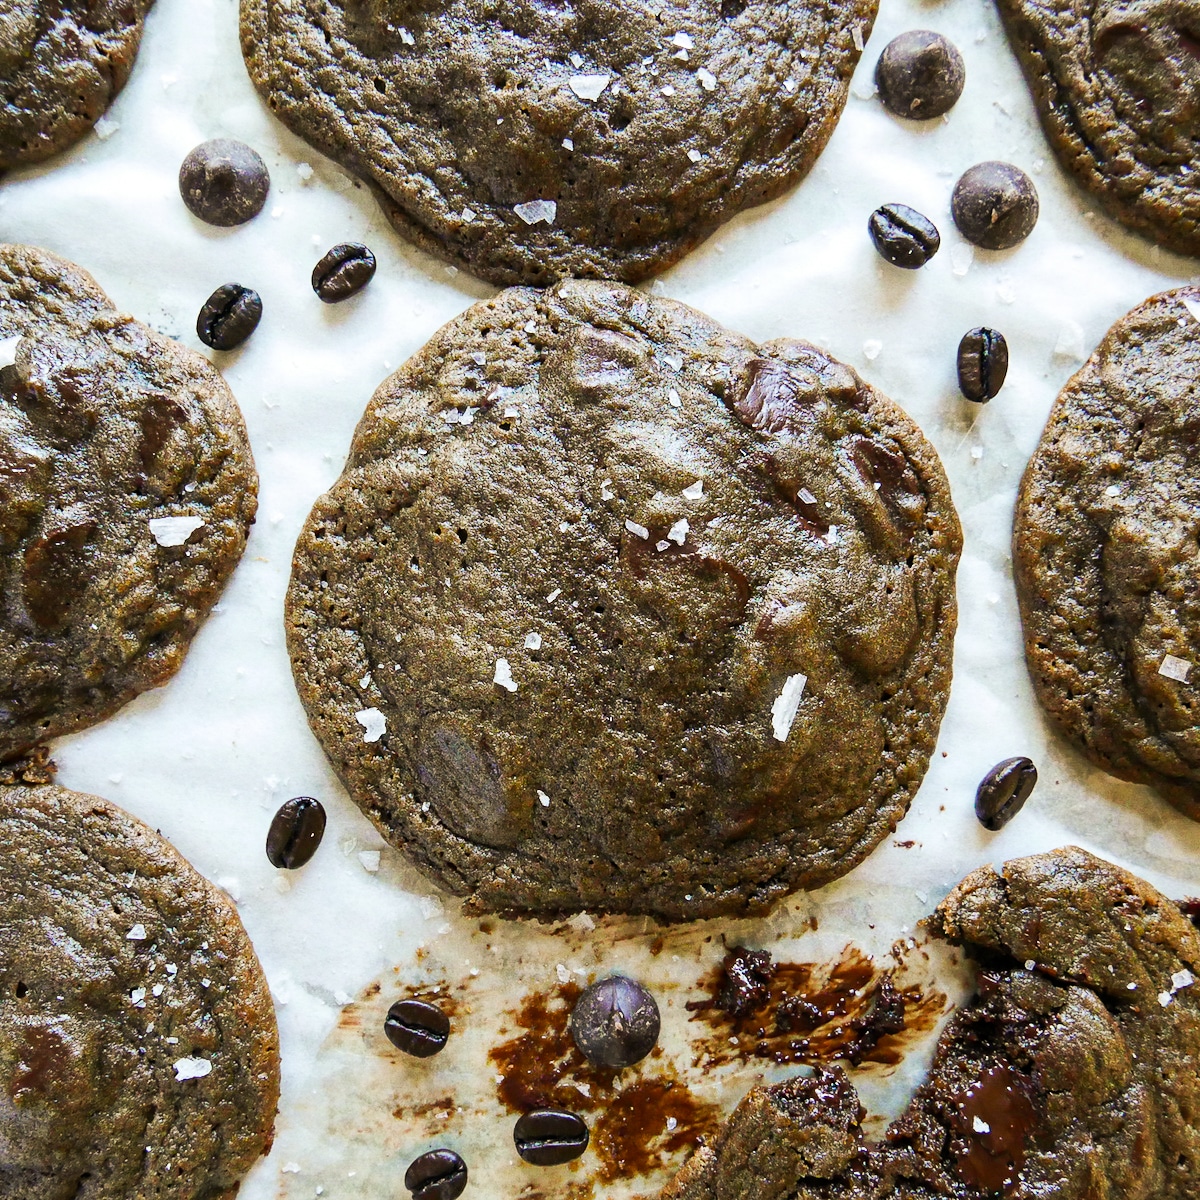 chewy coffee cookies arranged on parchment with coffee beans.